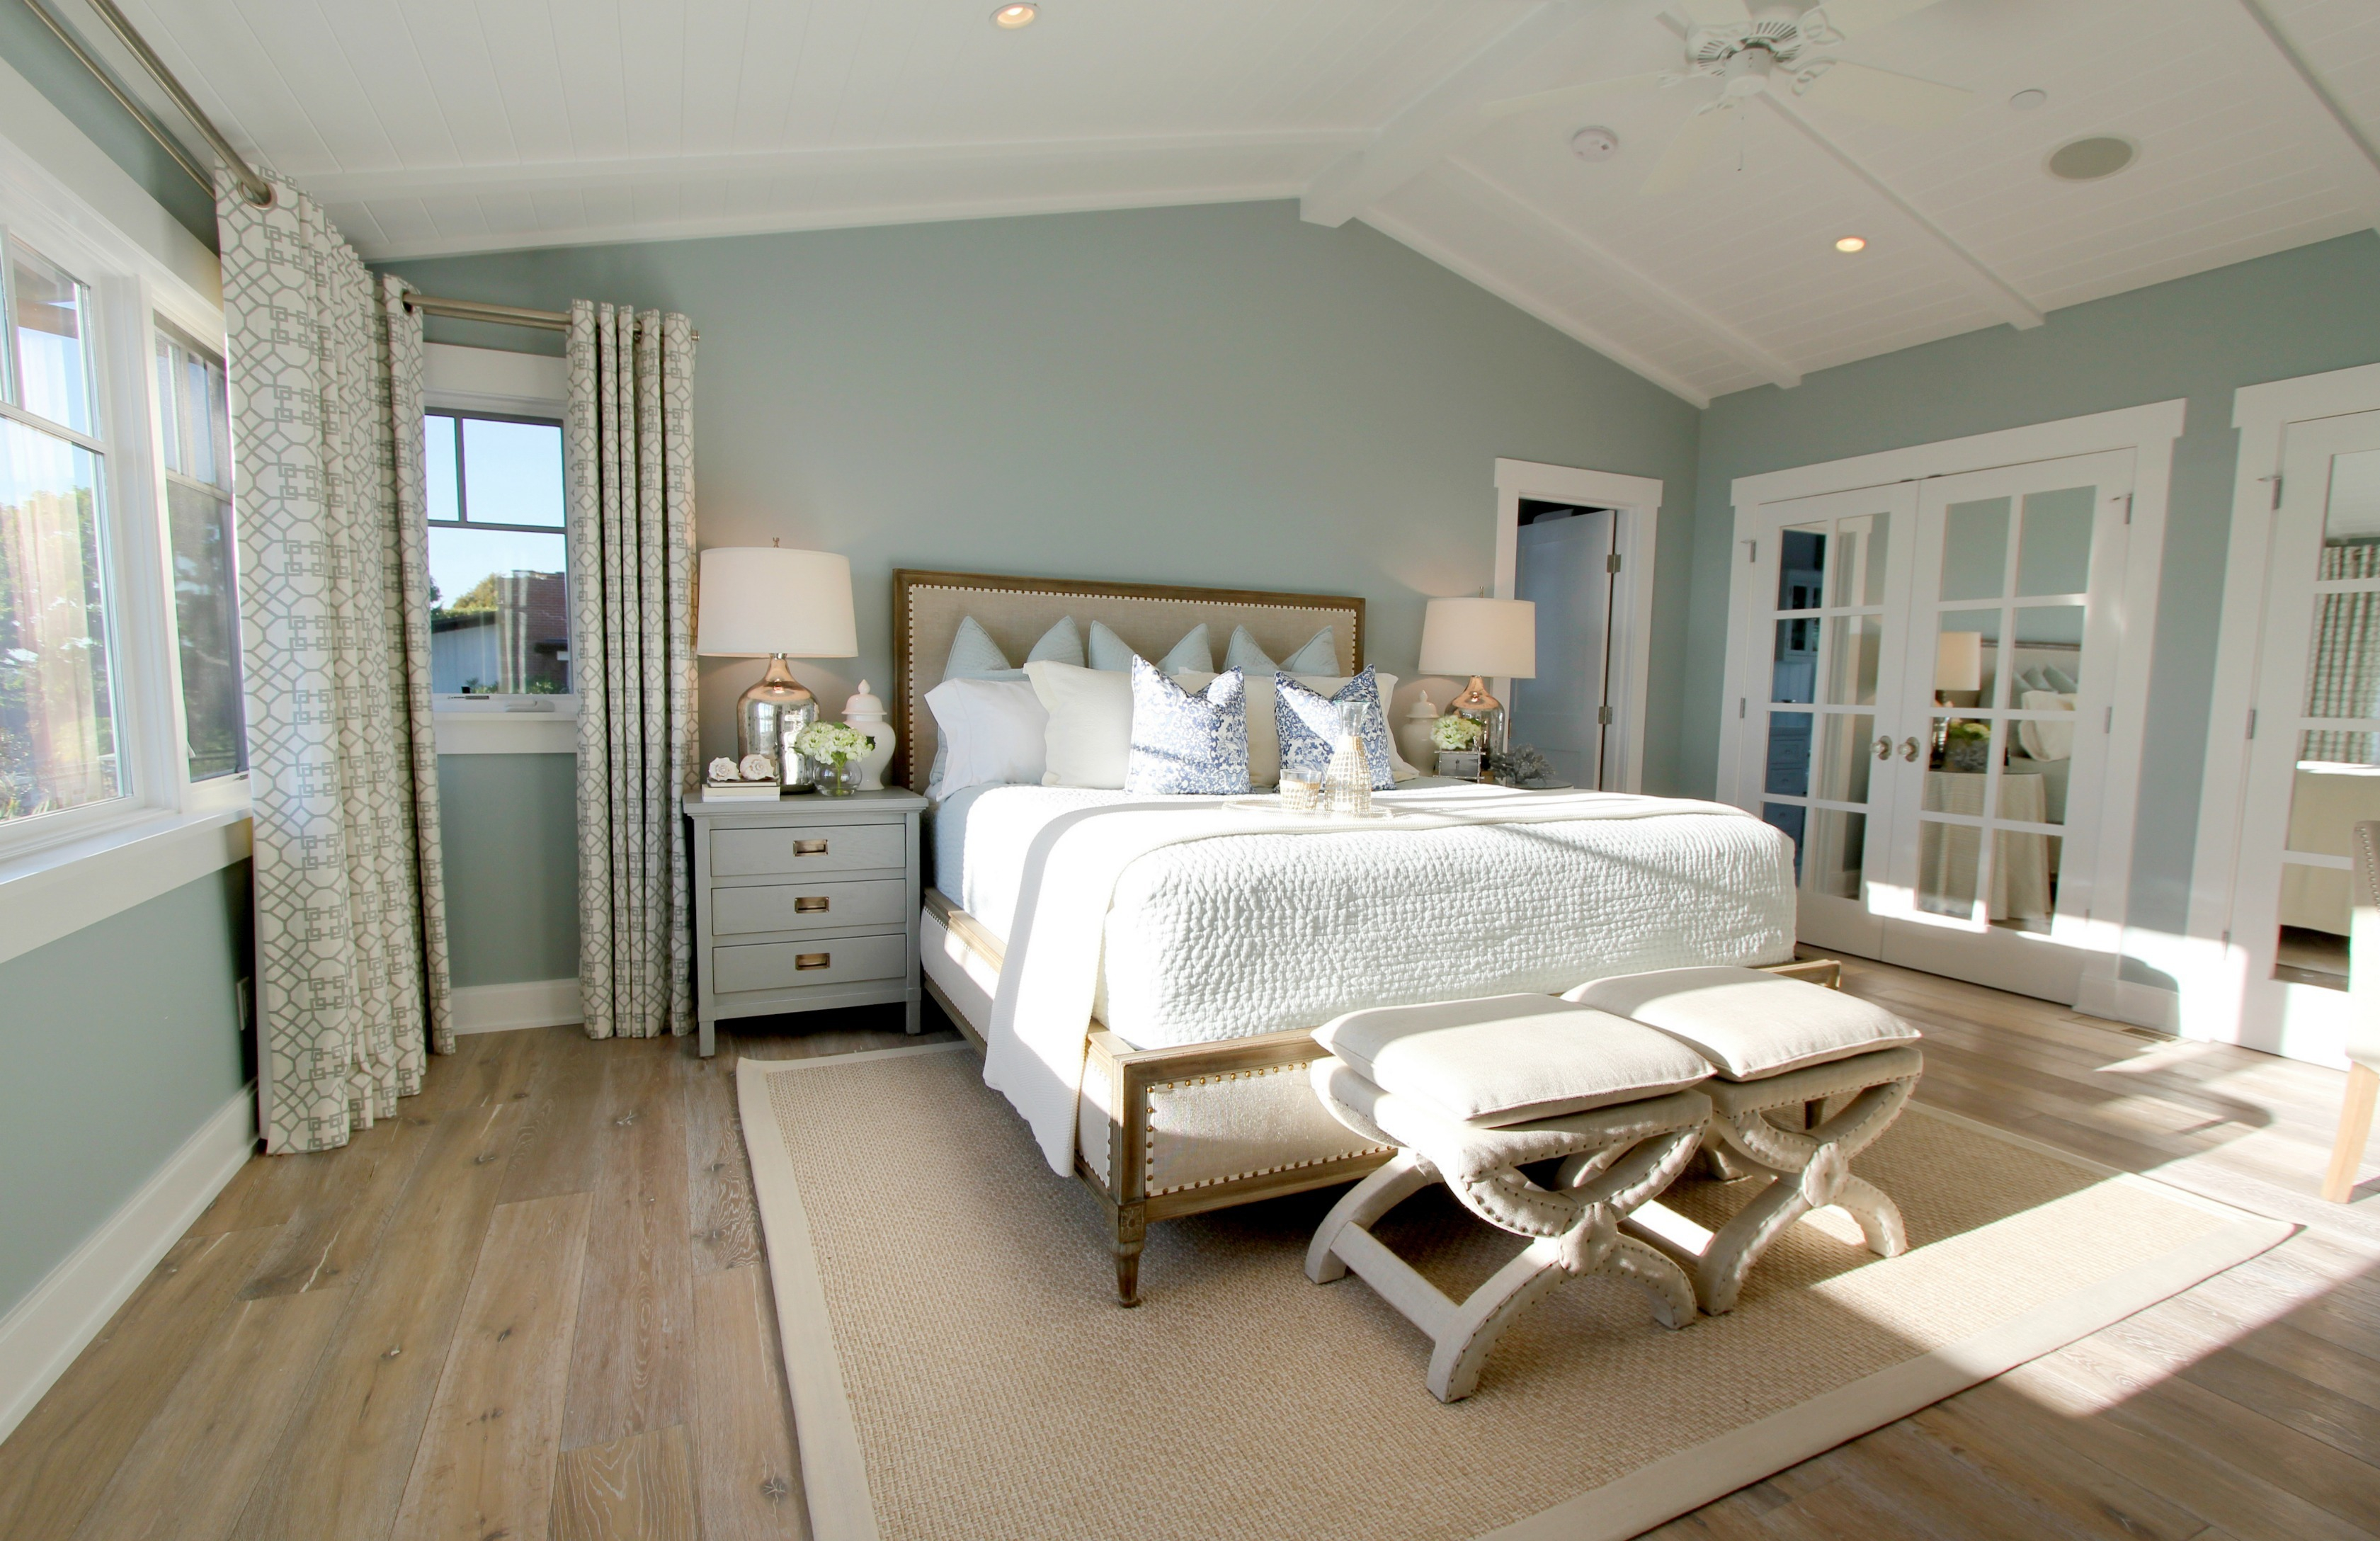 Bedroom Paint Color Trends For 2017 Better Homes Gardens intended for sizing 3361 X 2176